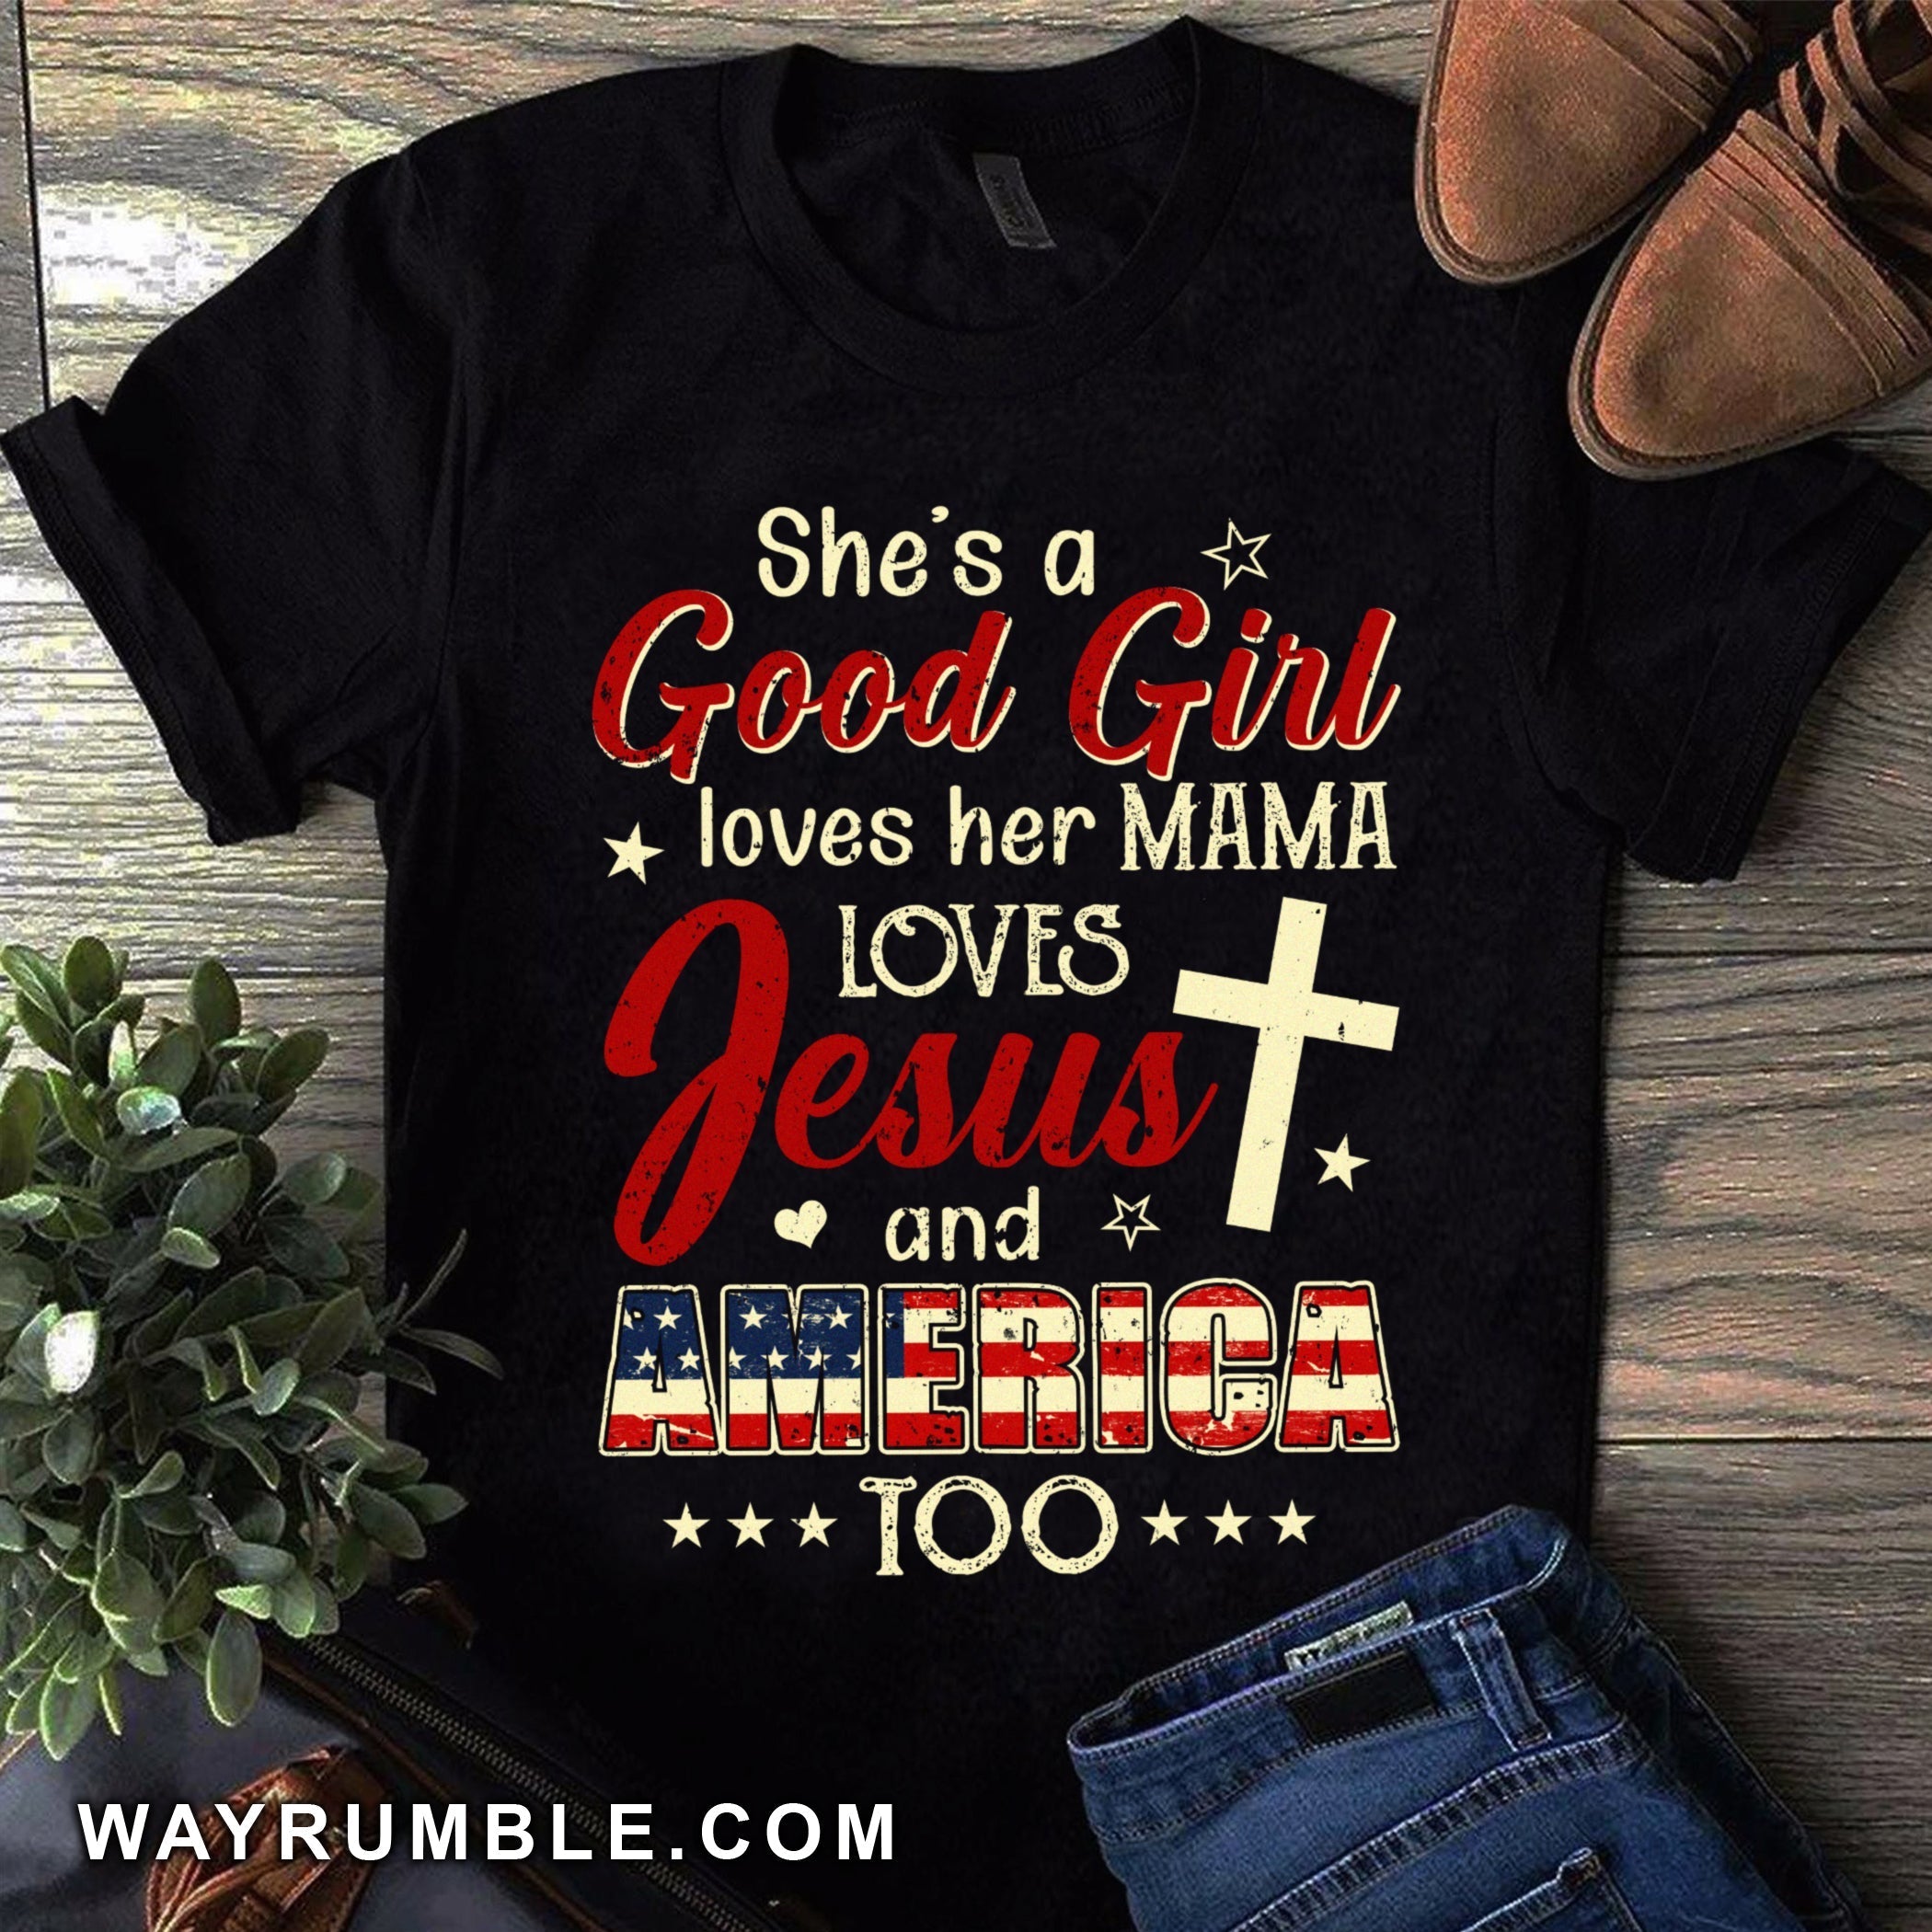 She’s a good girl – Loves her mama, Jesus and America too T Shirt